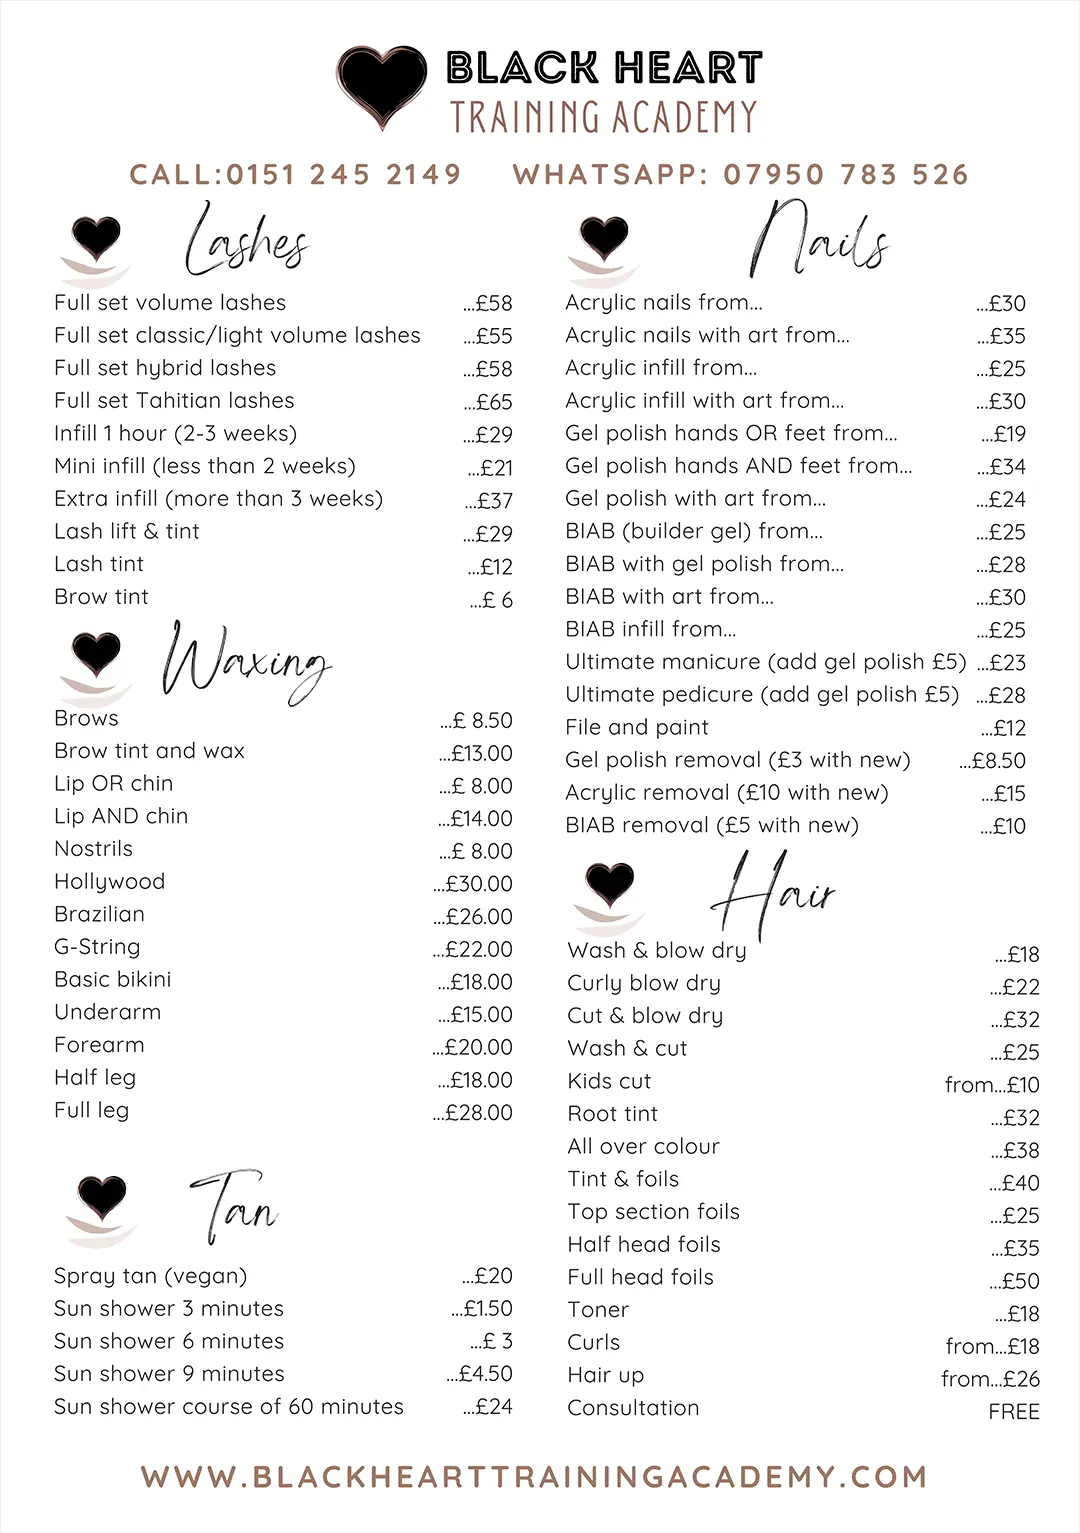 Photo showing price list page 2